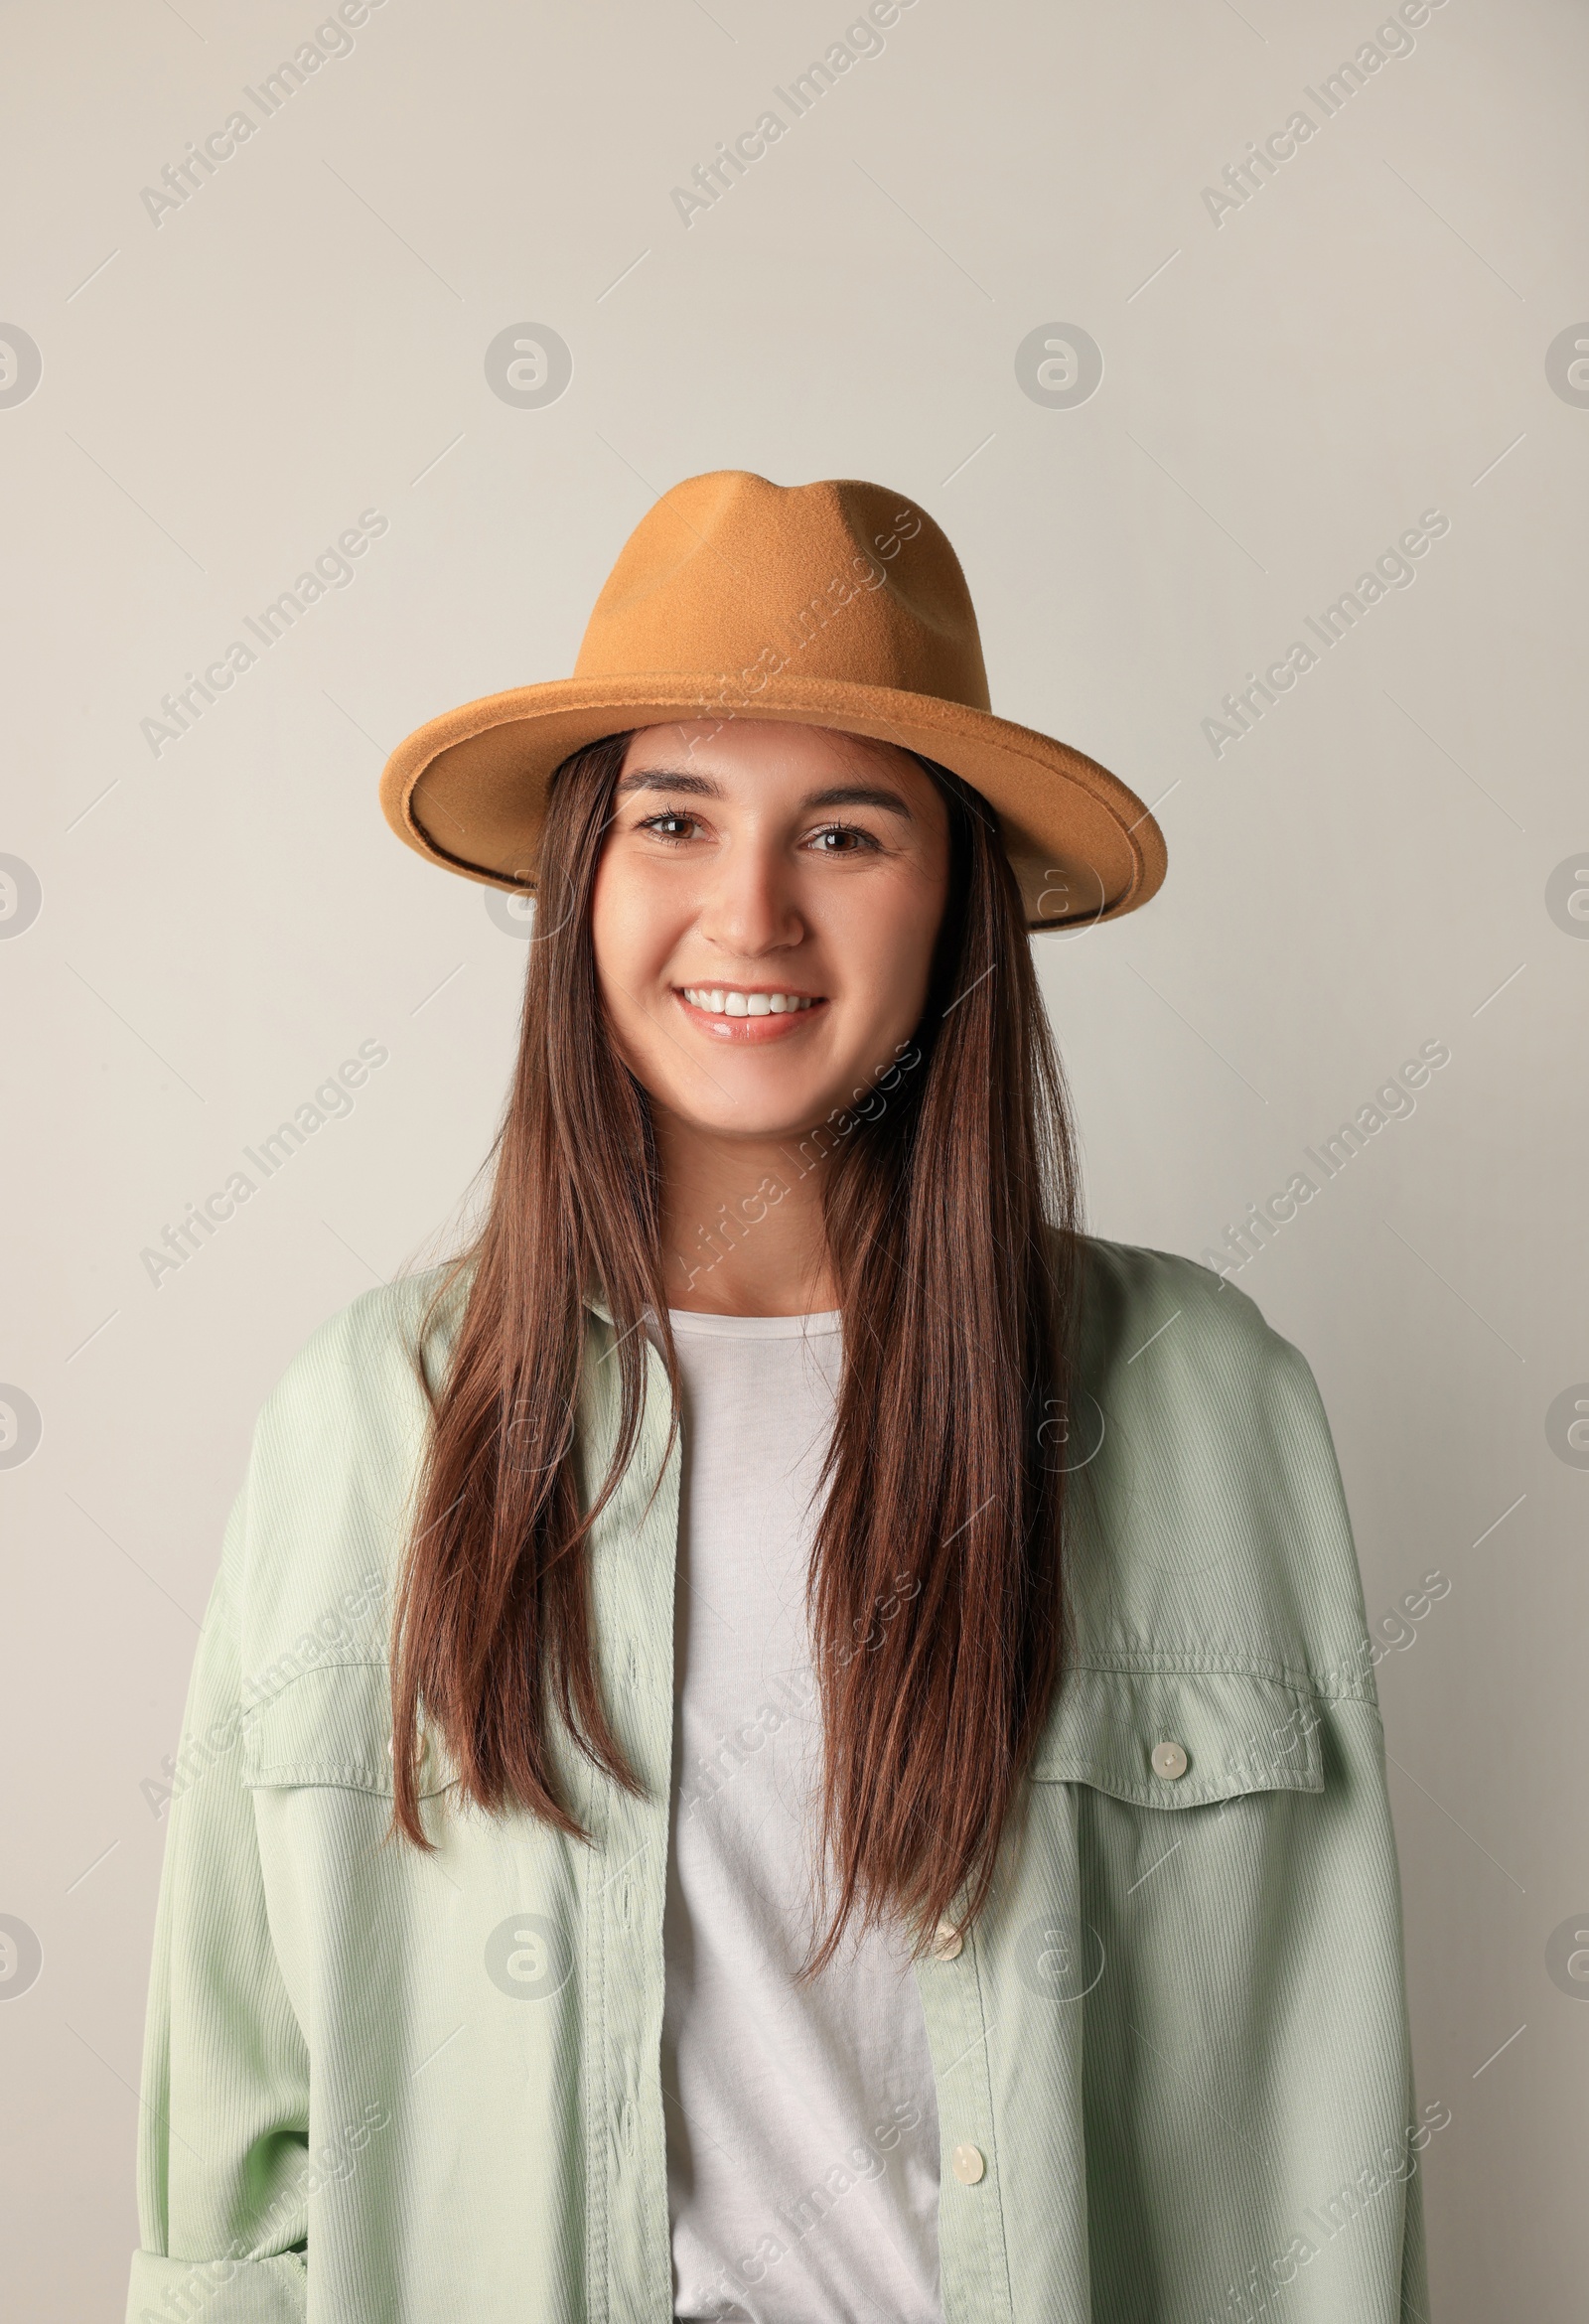 Photo of Smiling young woman in stylish outfit on light background